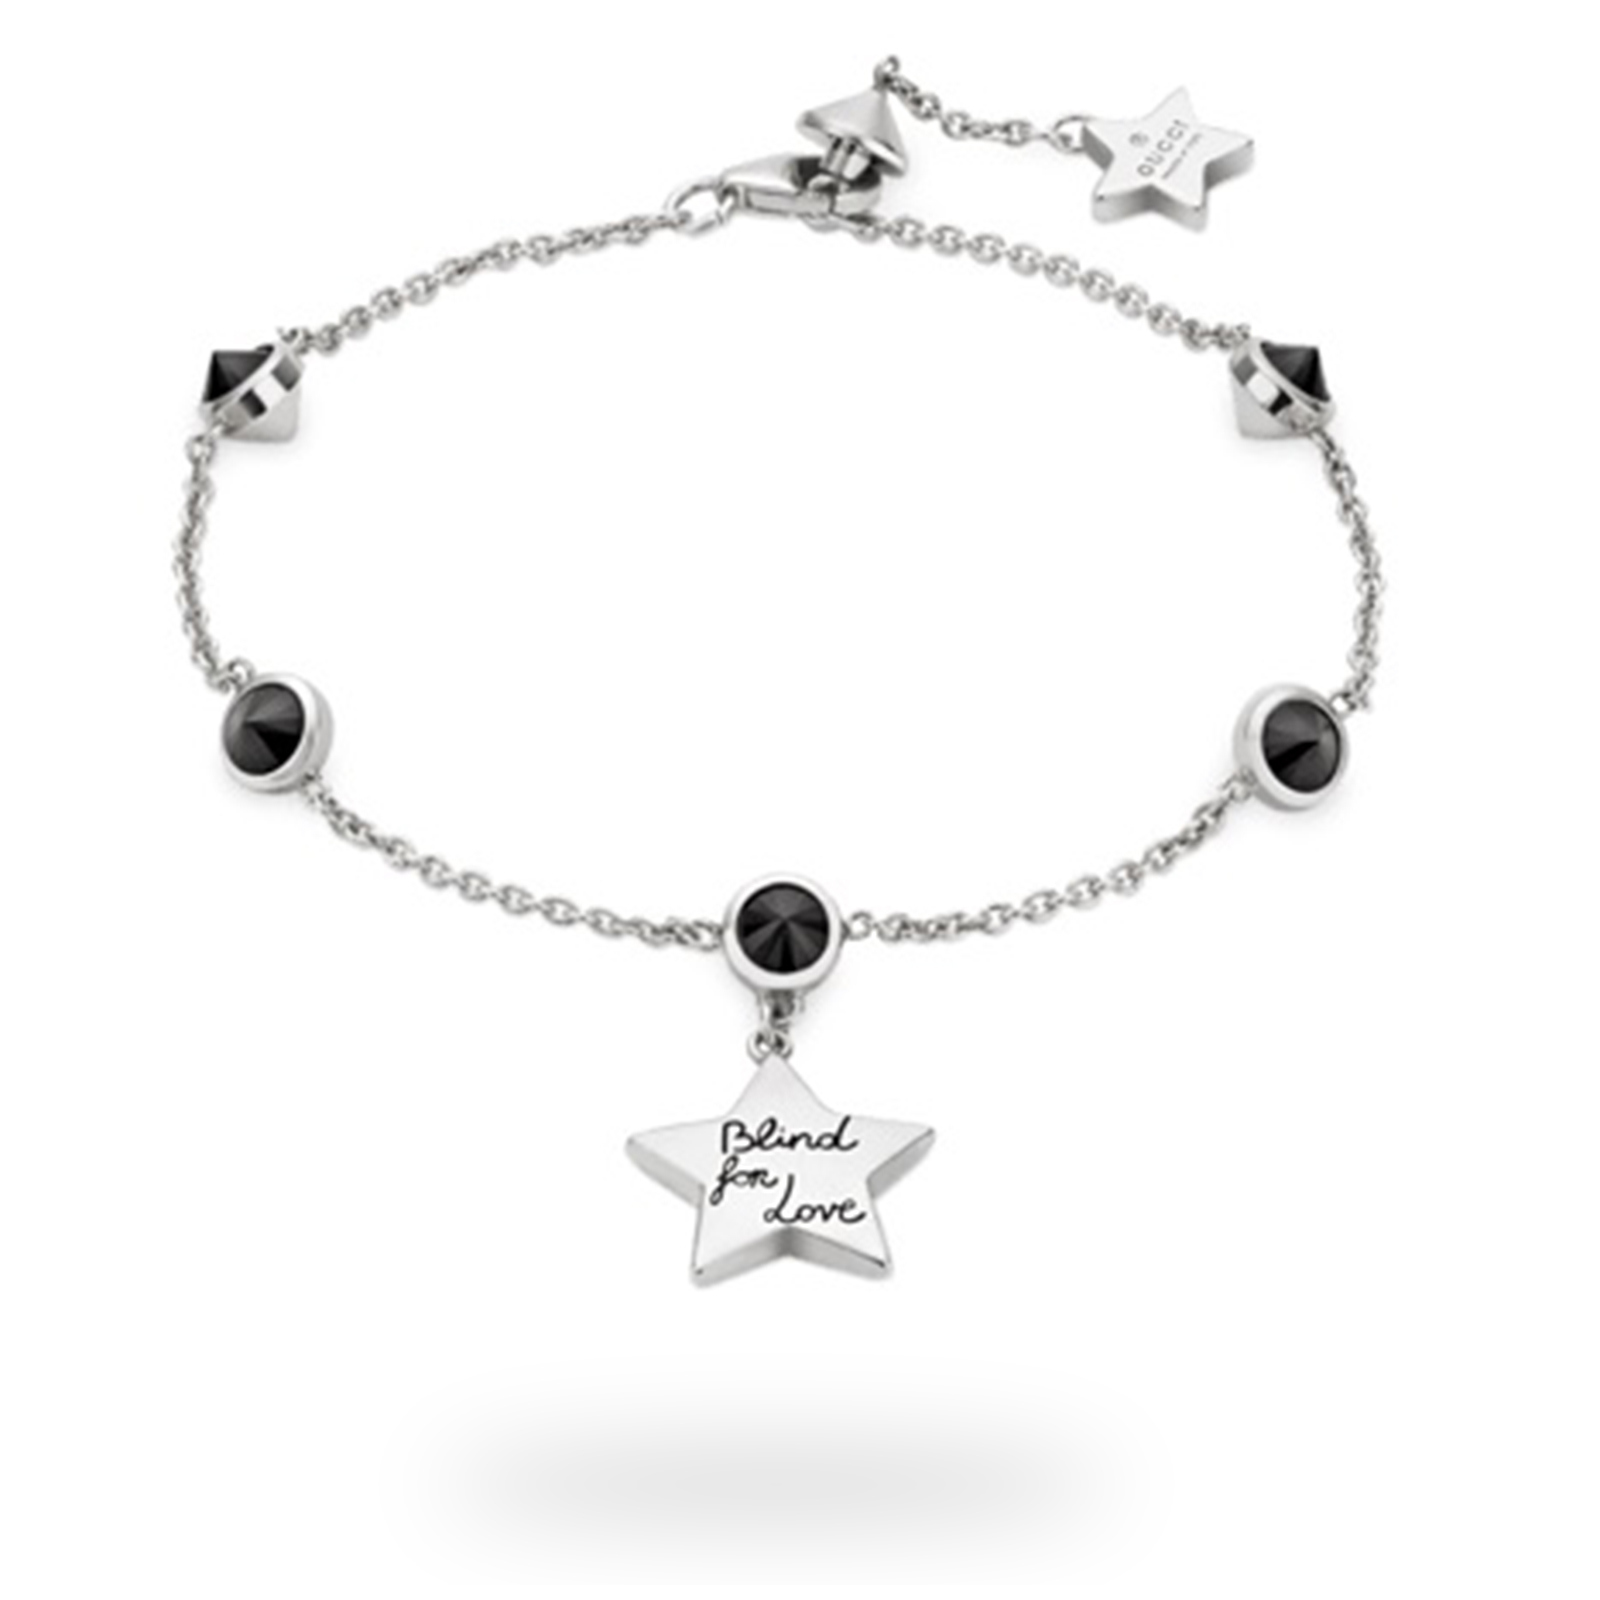 Our Ultimate Gucci Blind for Love Black Star Bracelet Reviews - Updated